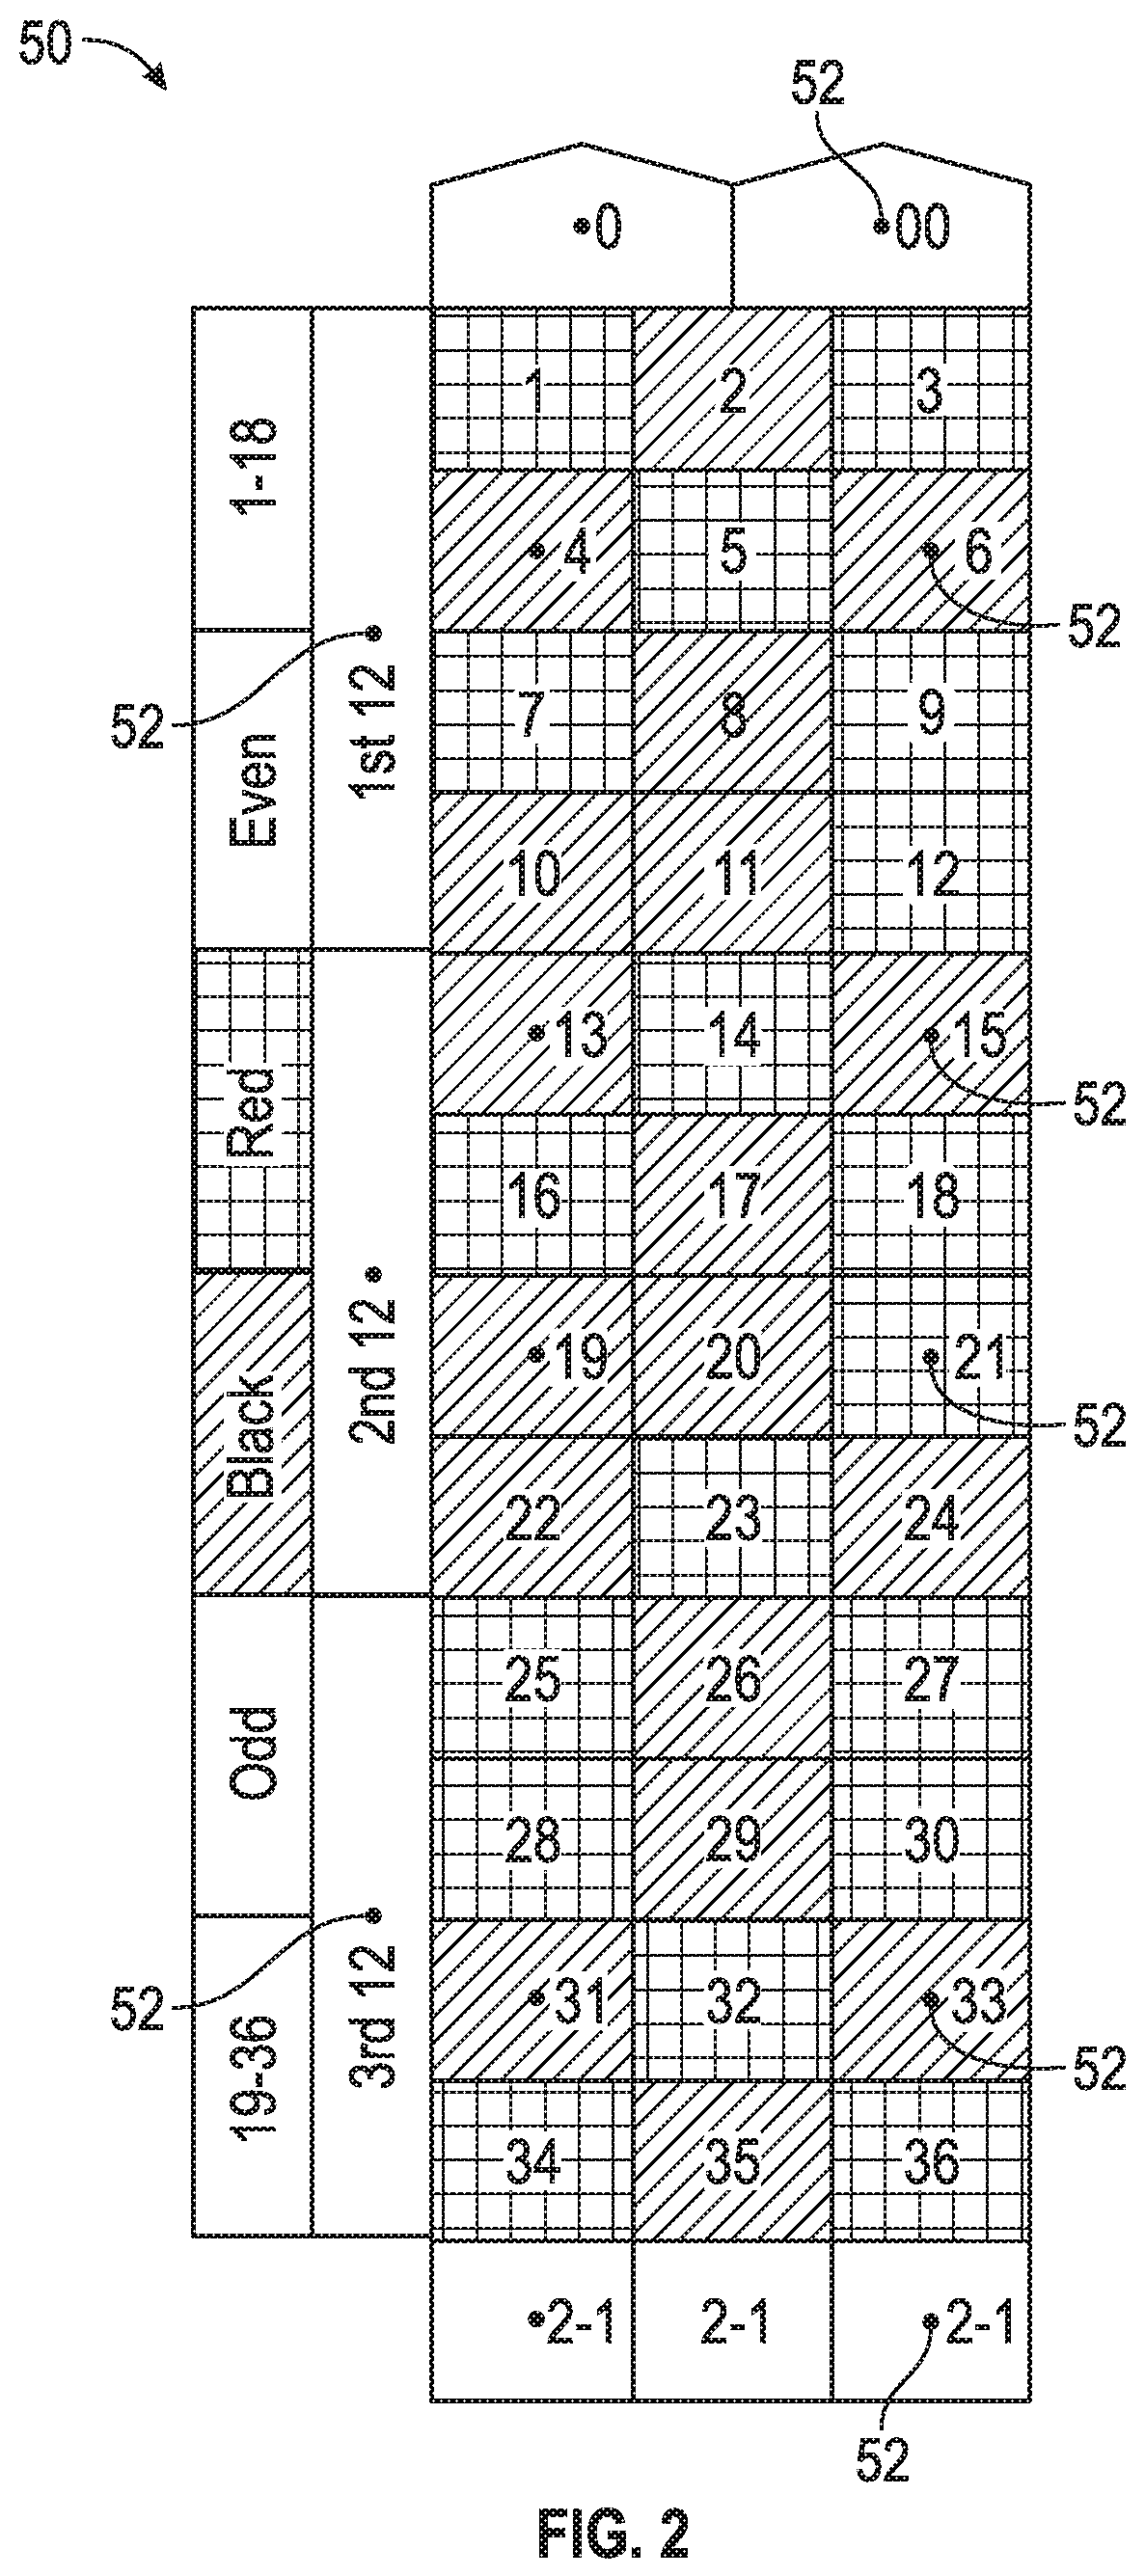 RFID device with dual frequency interrogation for enhanced security and method of preventing counterfeiting of RFID devices